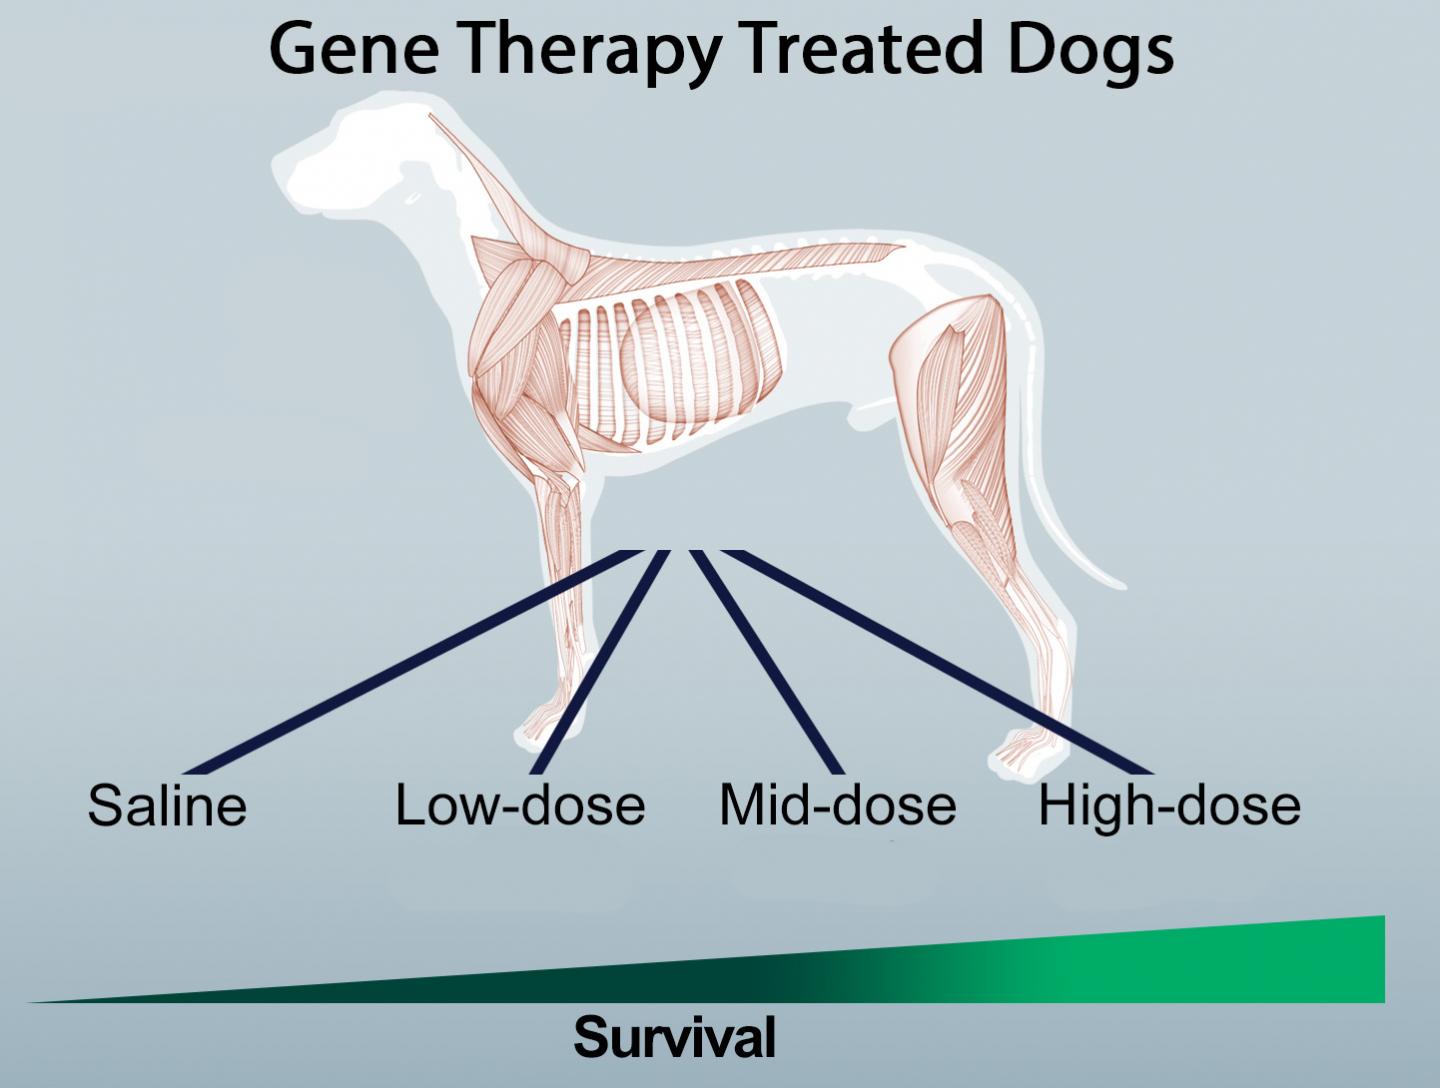 In a study replacing the mutated gene responsible for myotubular myopathy with a healthy gene throughout the entire musculature of affected dogs, researchers observed a relationship between dosage and survival. [Martin Childer lab/UW Medicine]